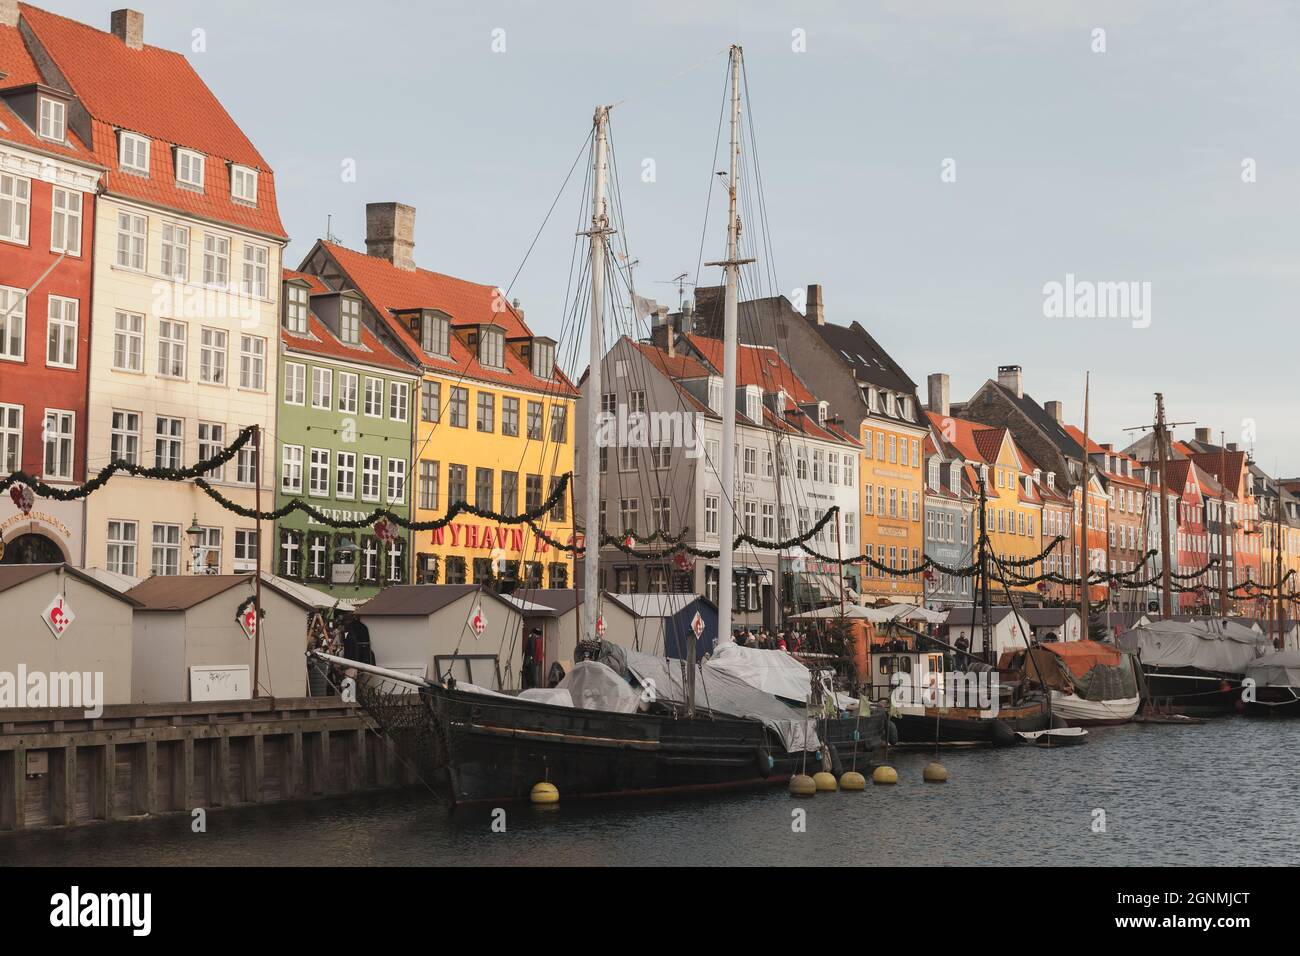 Copenhagen, Denmark - December 9, 2017: Nyhavn view on a sunny day, it is a 17th-century waterfront, canal and popular touristic destination of Copenh Stock Photo